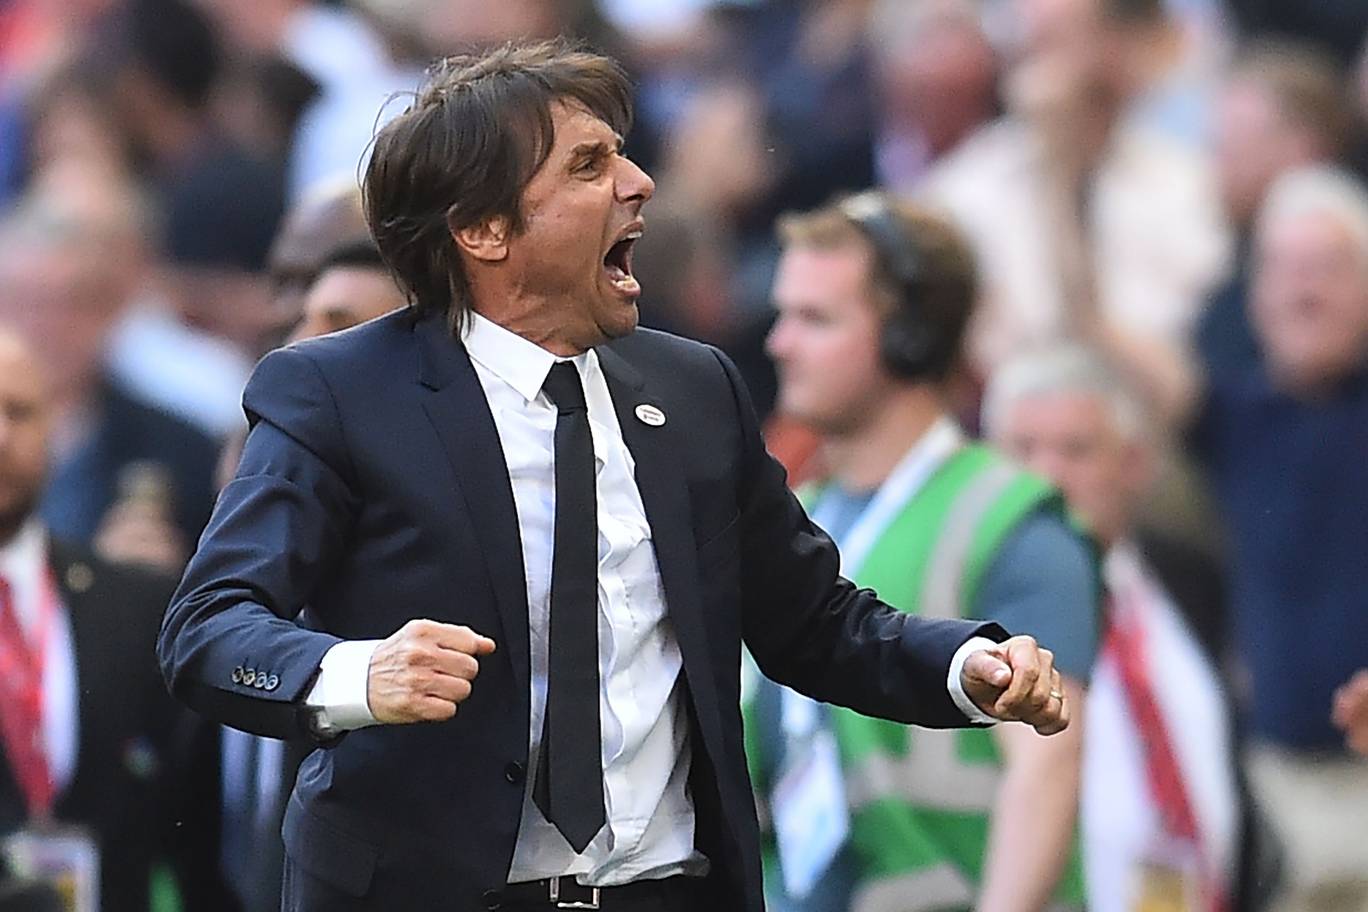 Antonio Conte is the former manager of Chelsea.